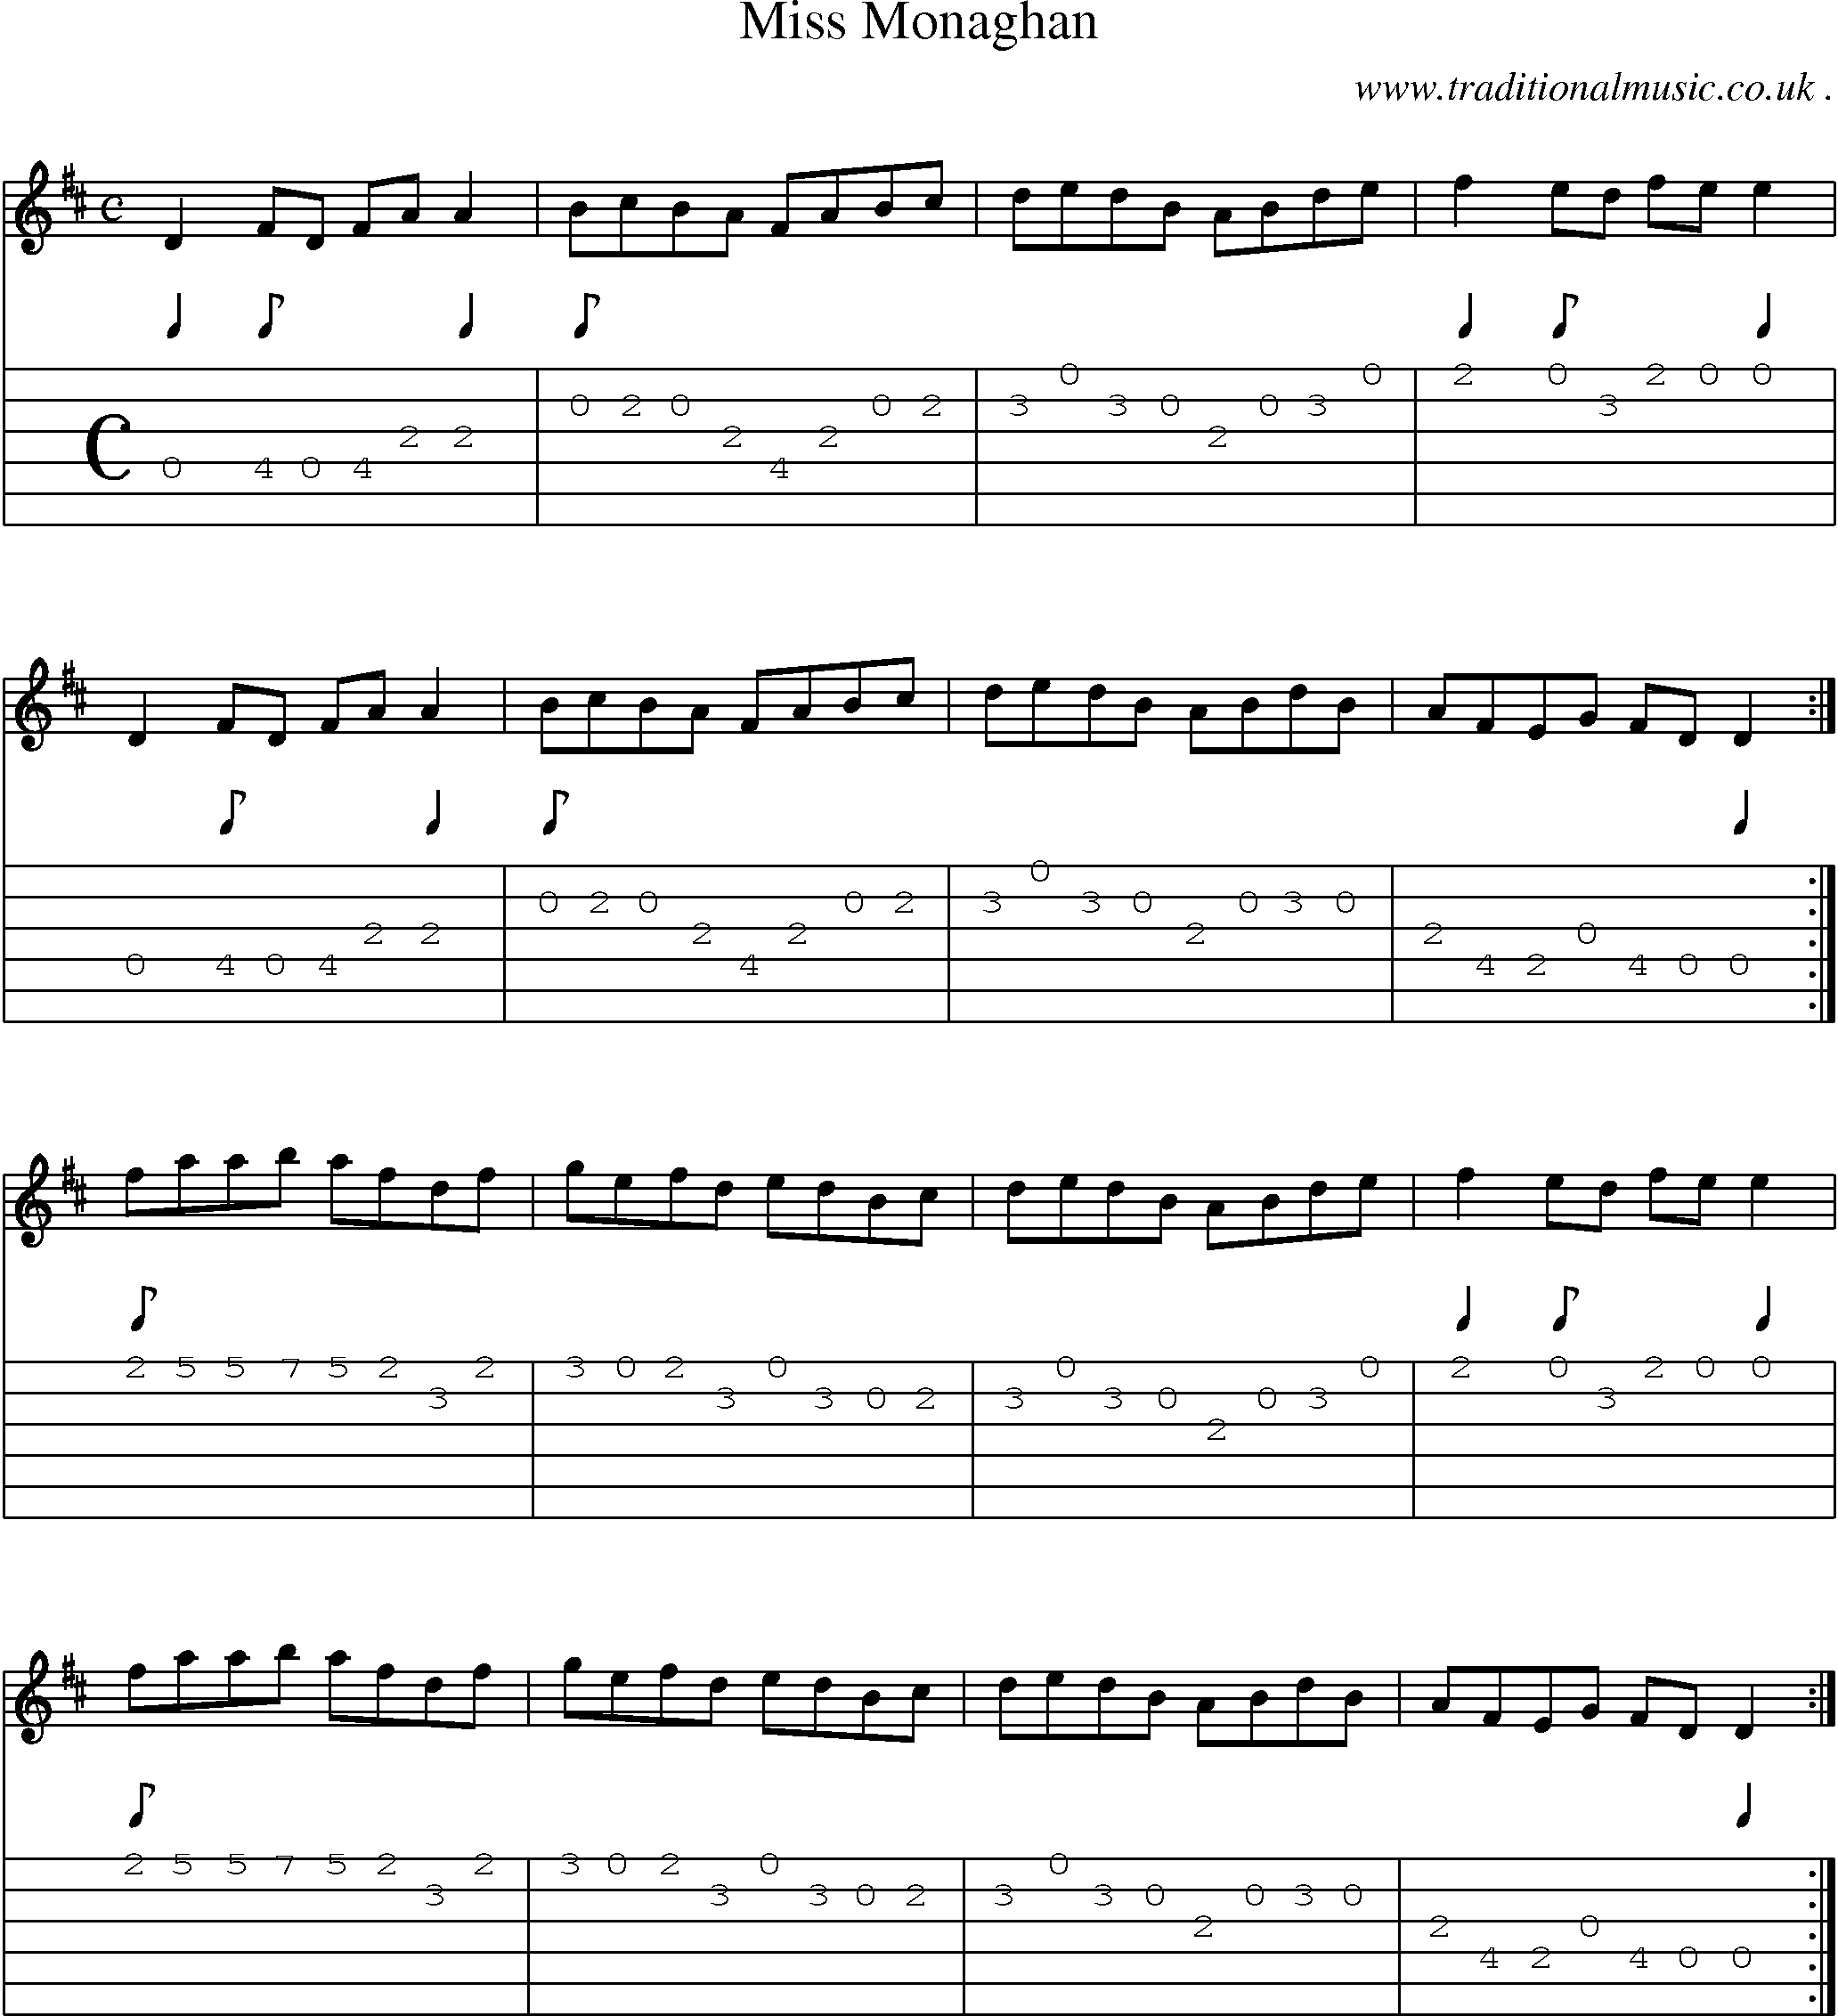 Sheet-Music and Guitar Tabs for Miss Monaghan